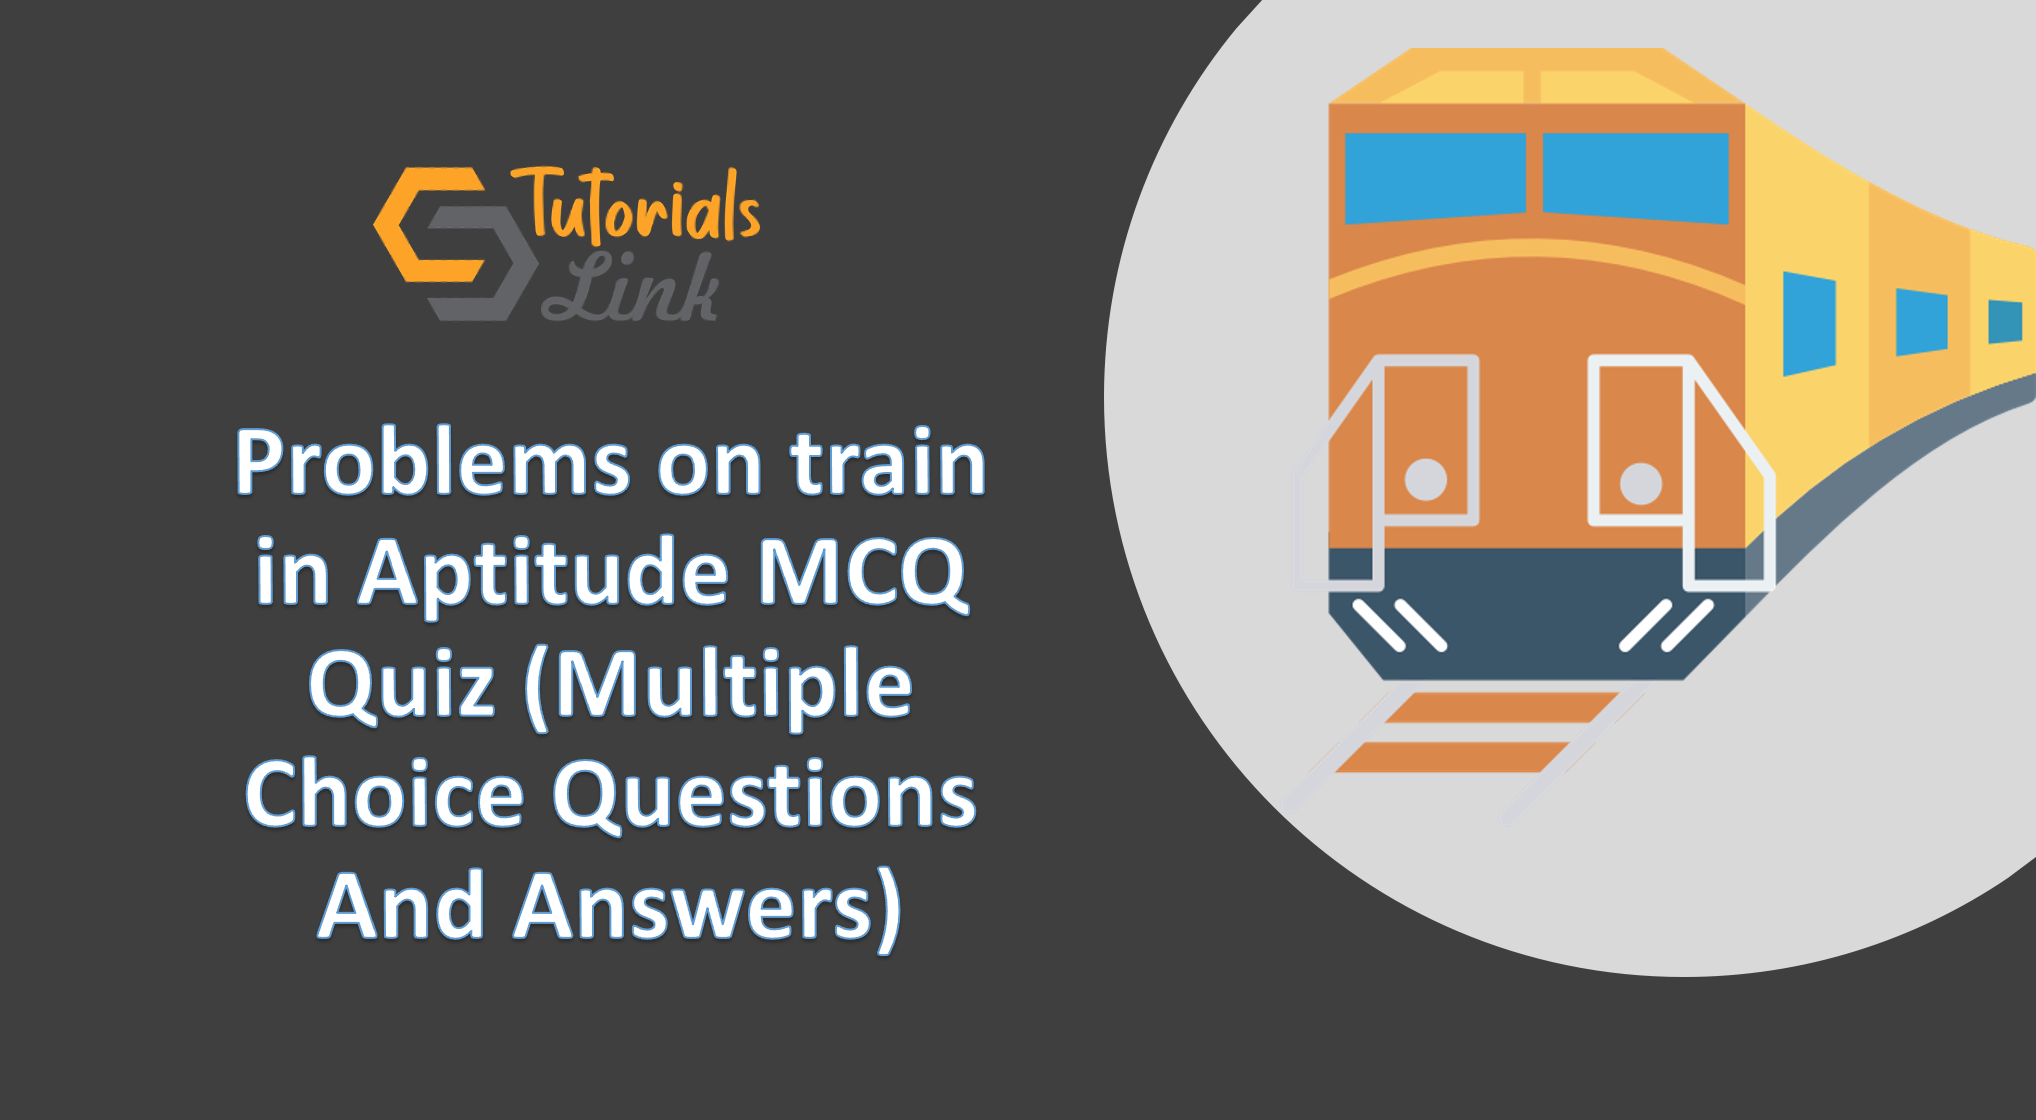 problems-on-train-in-aptitude-mcq-quiz-multiple-choice-questions-and-answers-tutorials-link